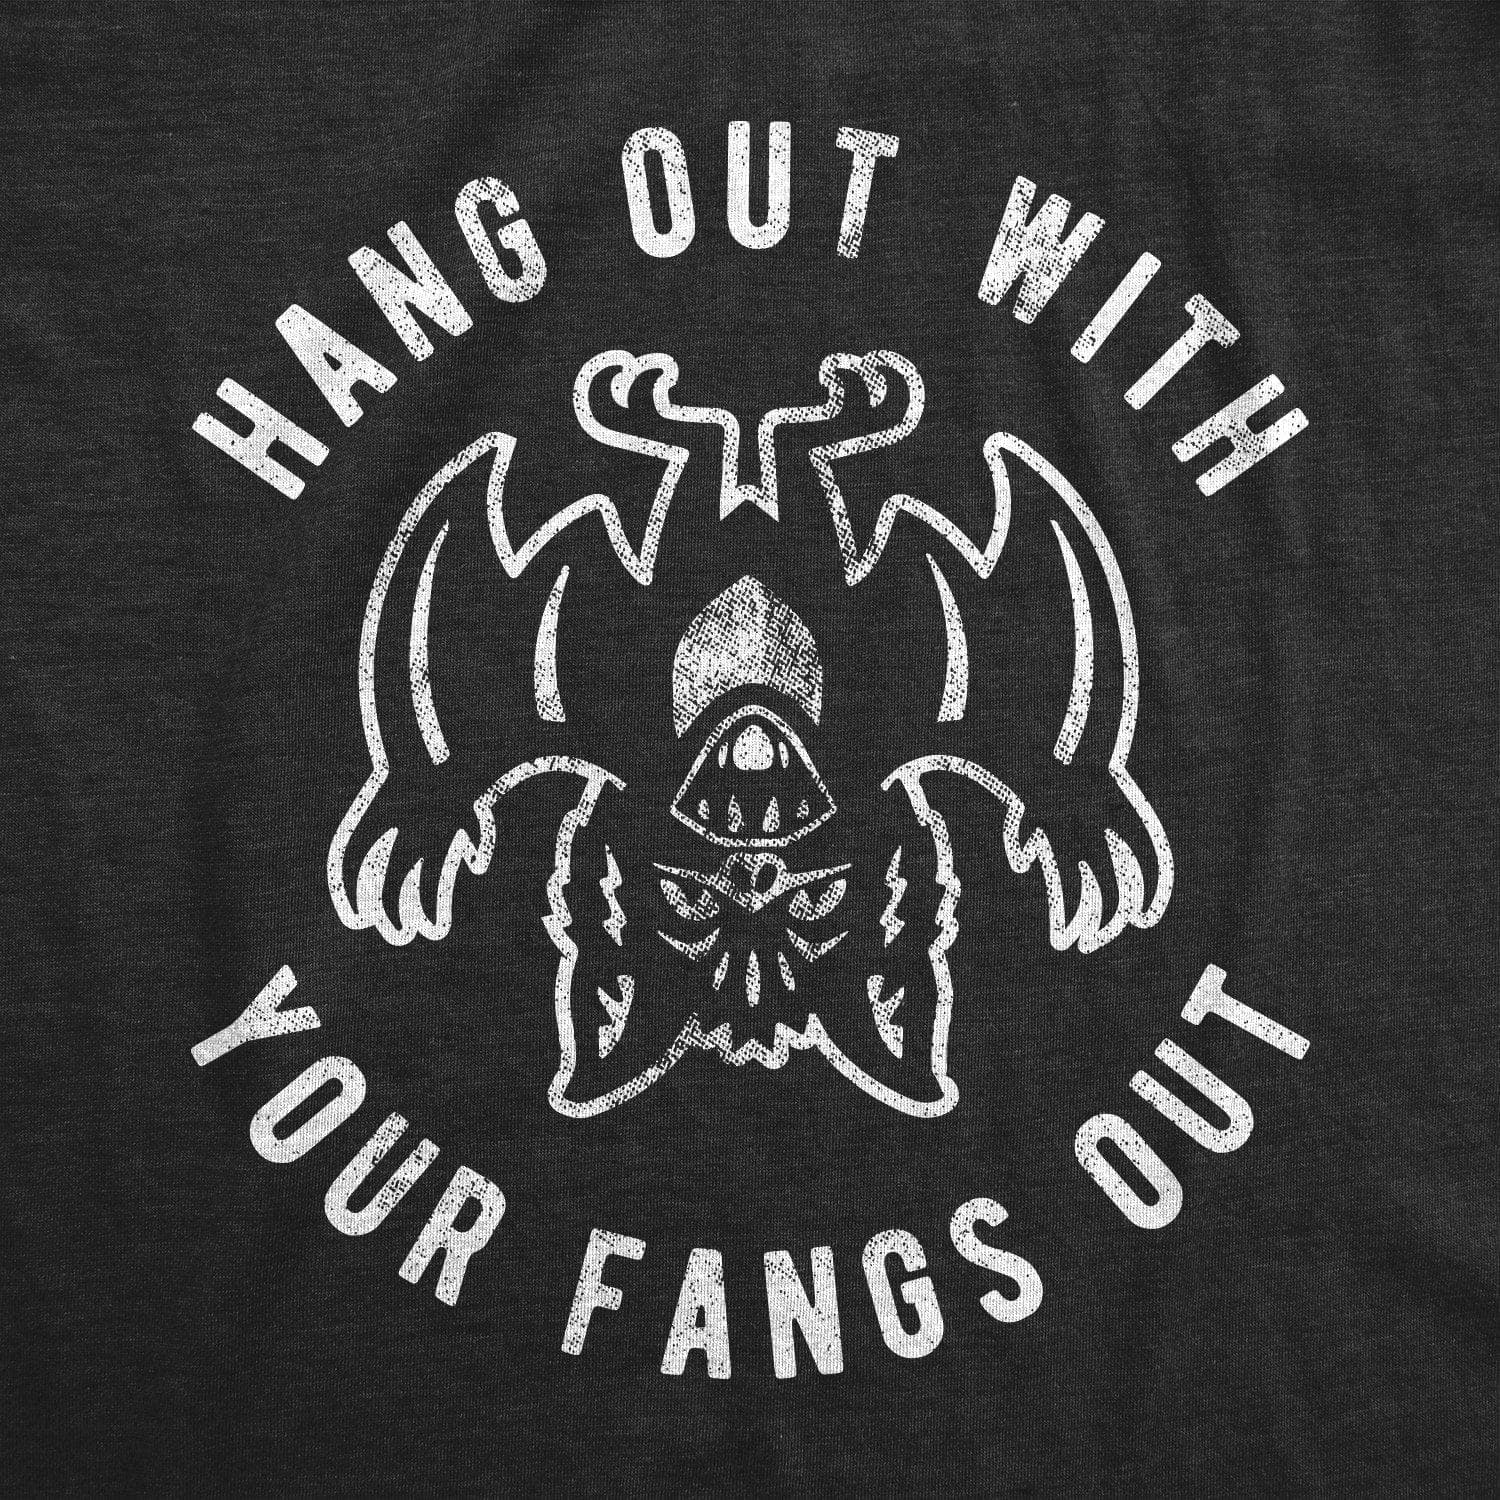 Hang Out With Your Fangs Out Men's Tshirt - Crazy Dog T-Shirts